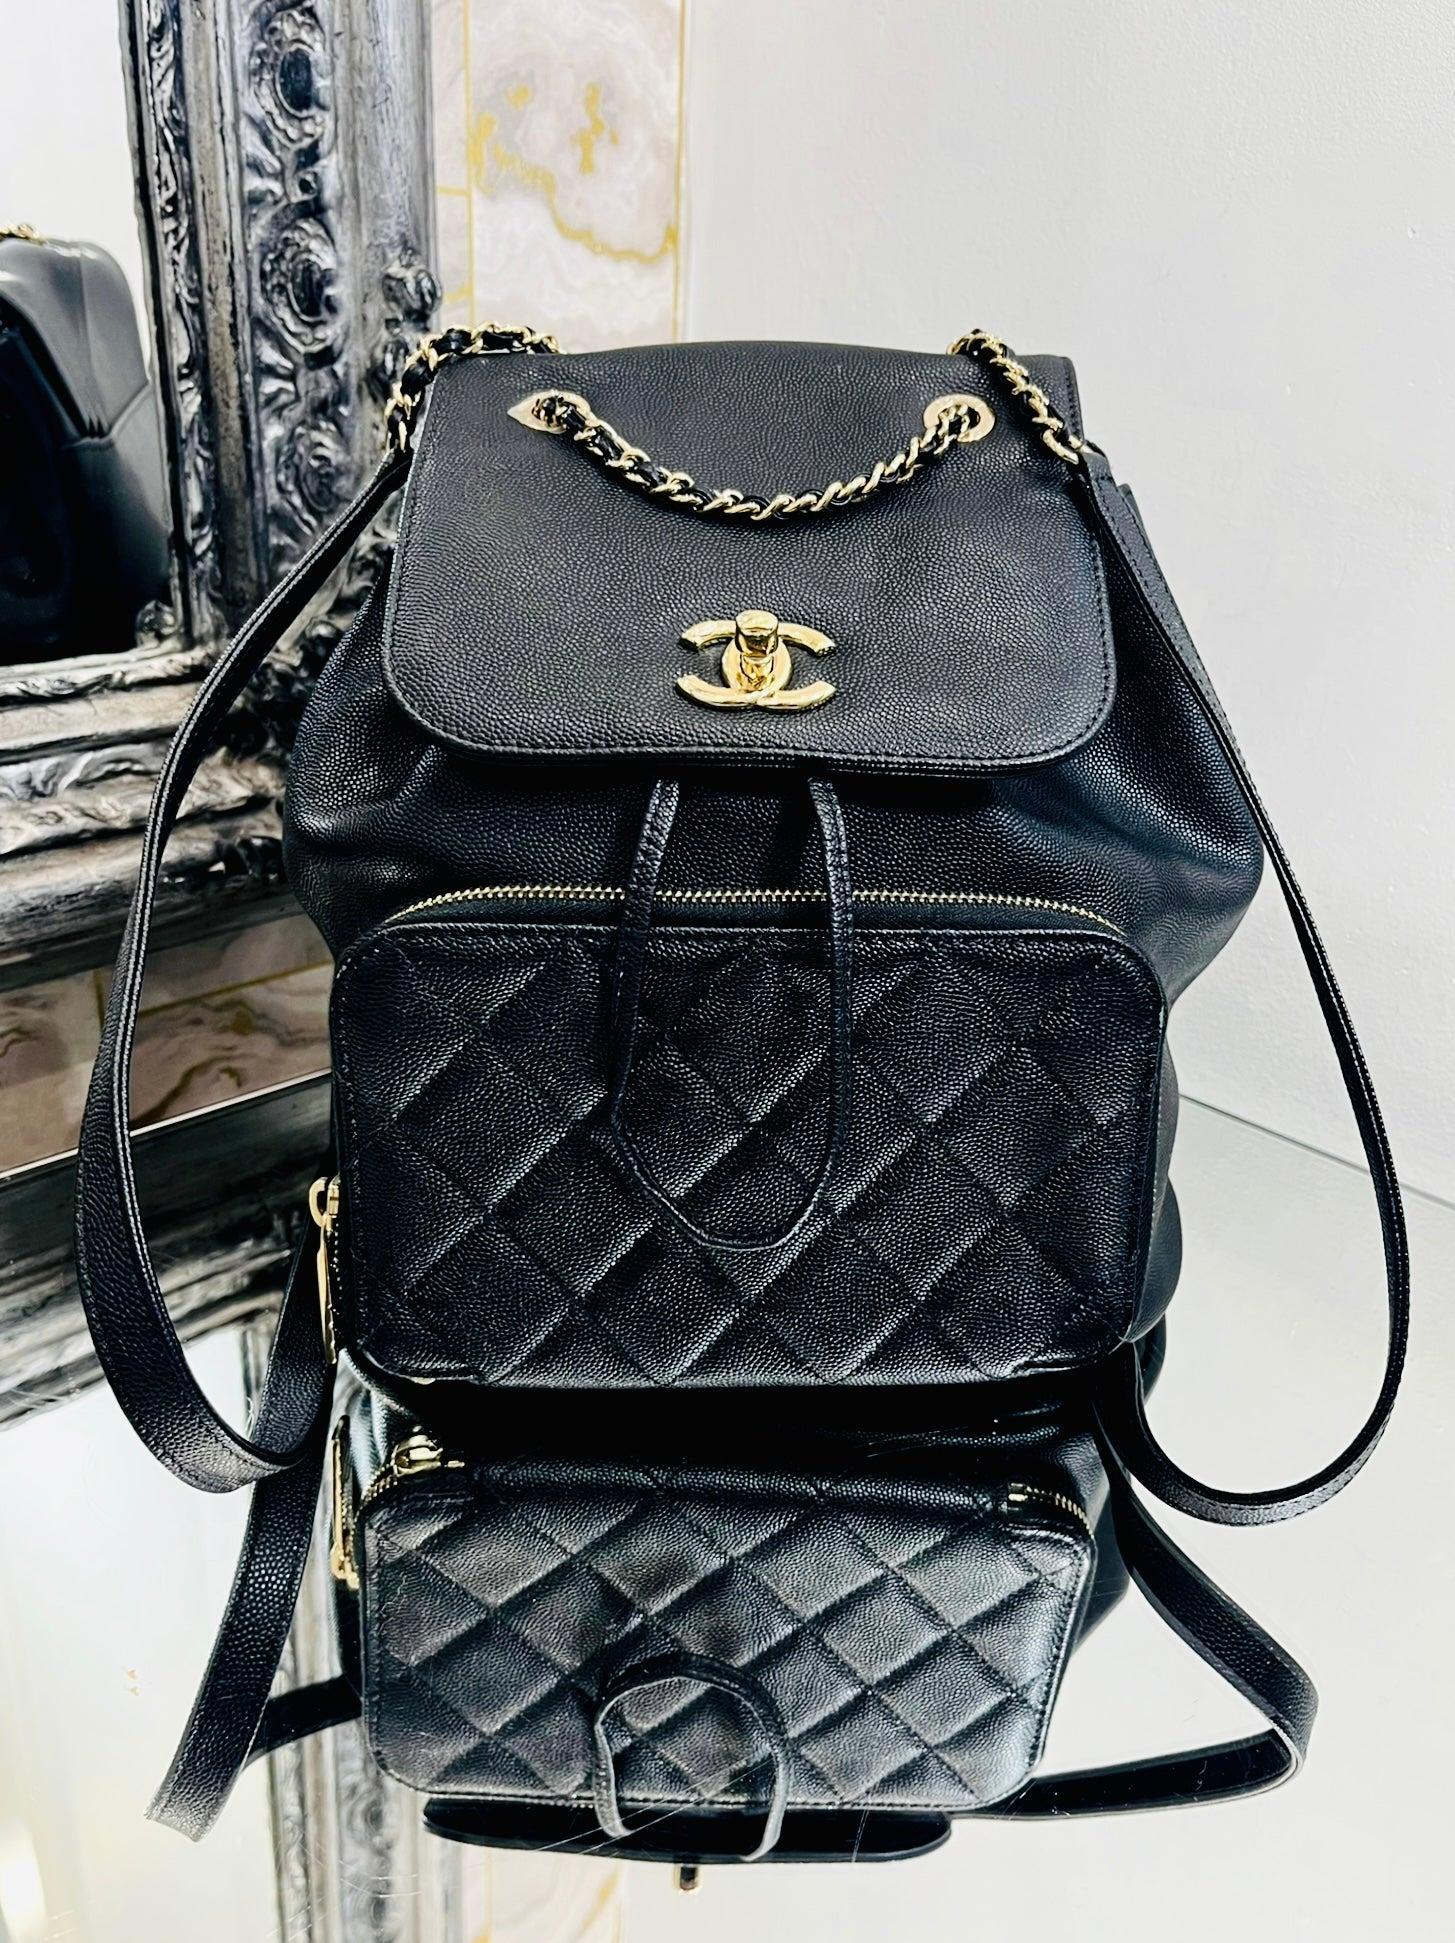 Chanel Affinity Caviar Leather Backpack

Caviar and quilted, diamond stitch leather with champagne gold 'CC'

logo hardware. Timeless twist lock closure, Drawstring pull, zipper compartment

to front and open back pocket to rear.

Size - Height